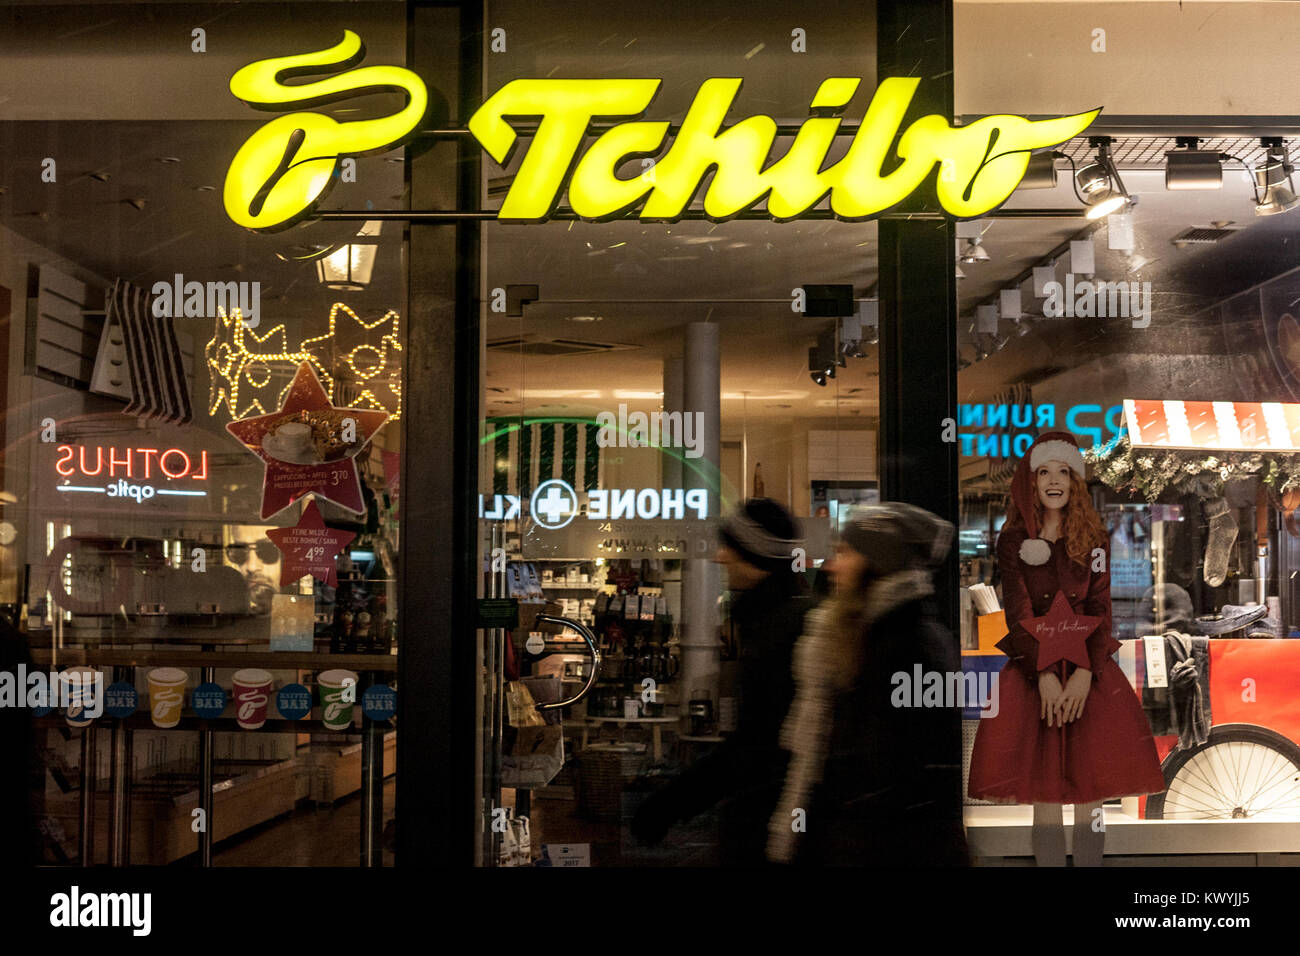 MUNICH, GERMANY - DECEMBER 17, 2017: Tchibo logo on their Munich main shop taken at night. Tchibo is a German chain of coffee retailers and cafés know Stock Photo